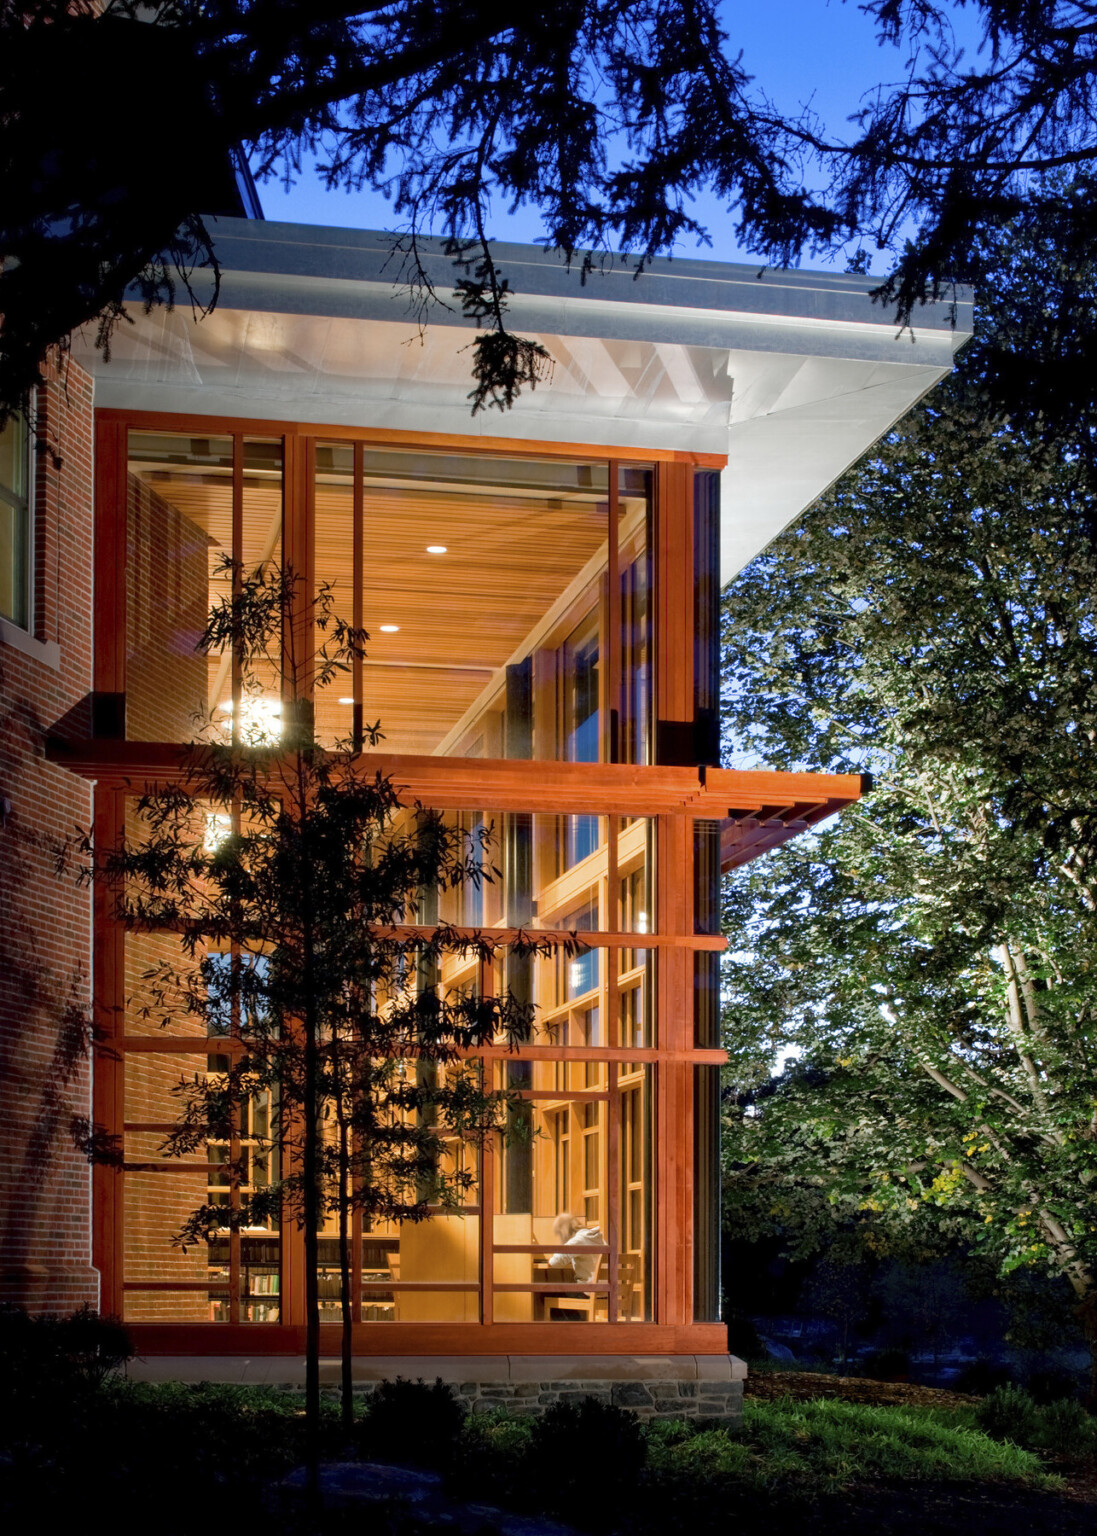 Exterior view of corner space, double height space illuminated at night, surrounded by trees